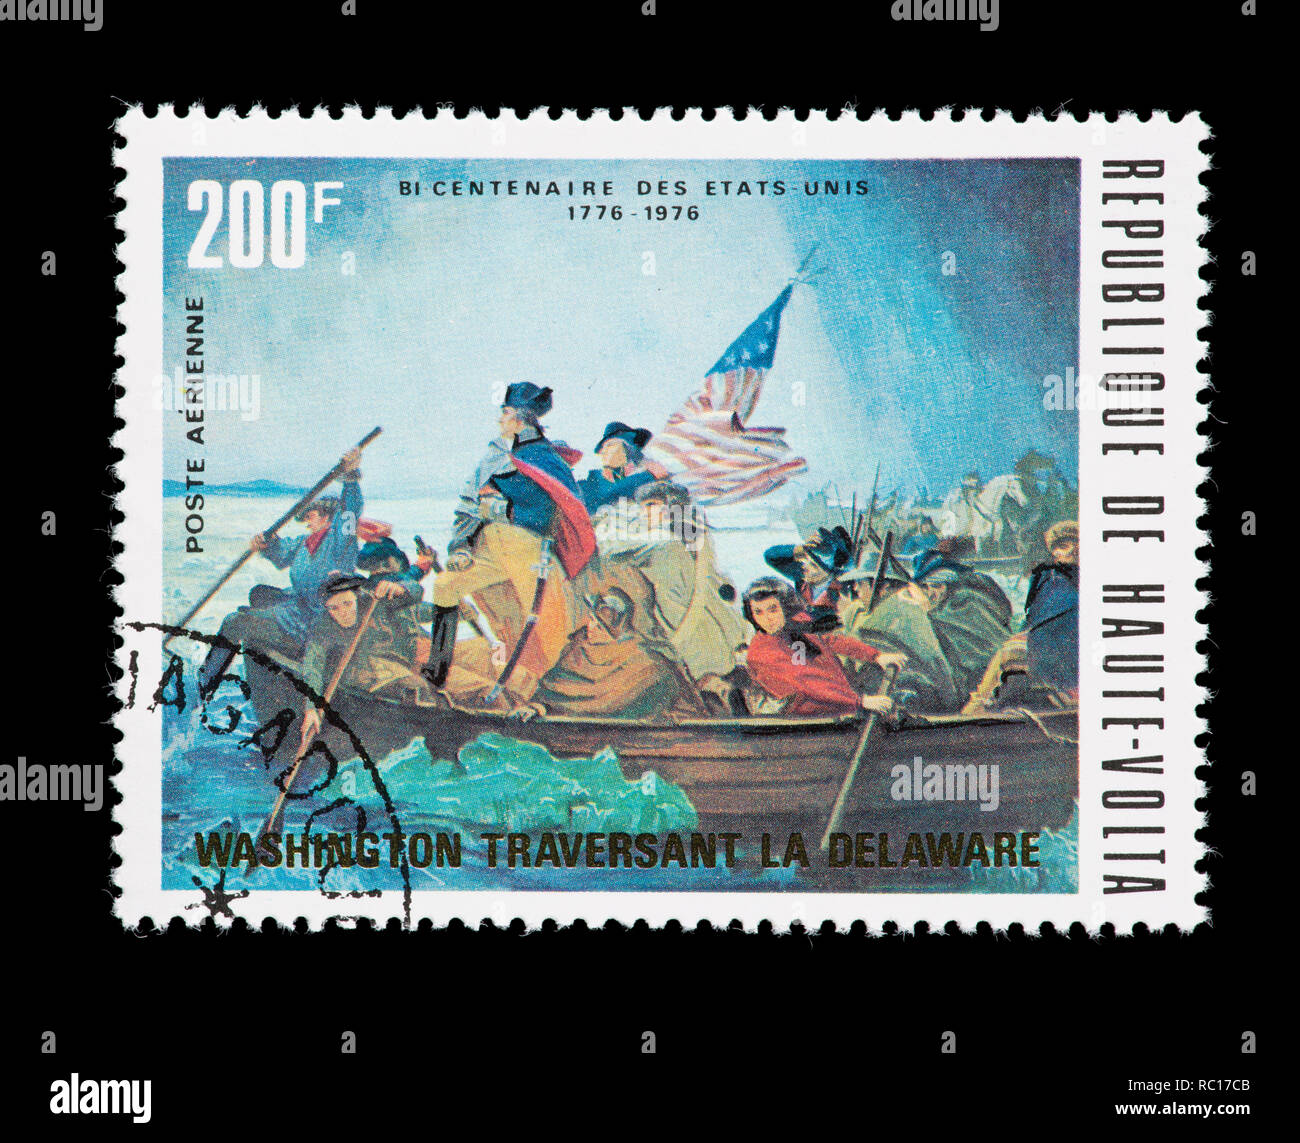 Postage stamp from Upper Volta (Burkina Faso) depicting Washington crossing the Delaware river, United States bicentennial. Stock Photo